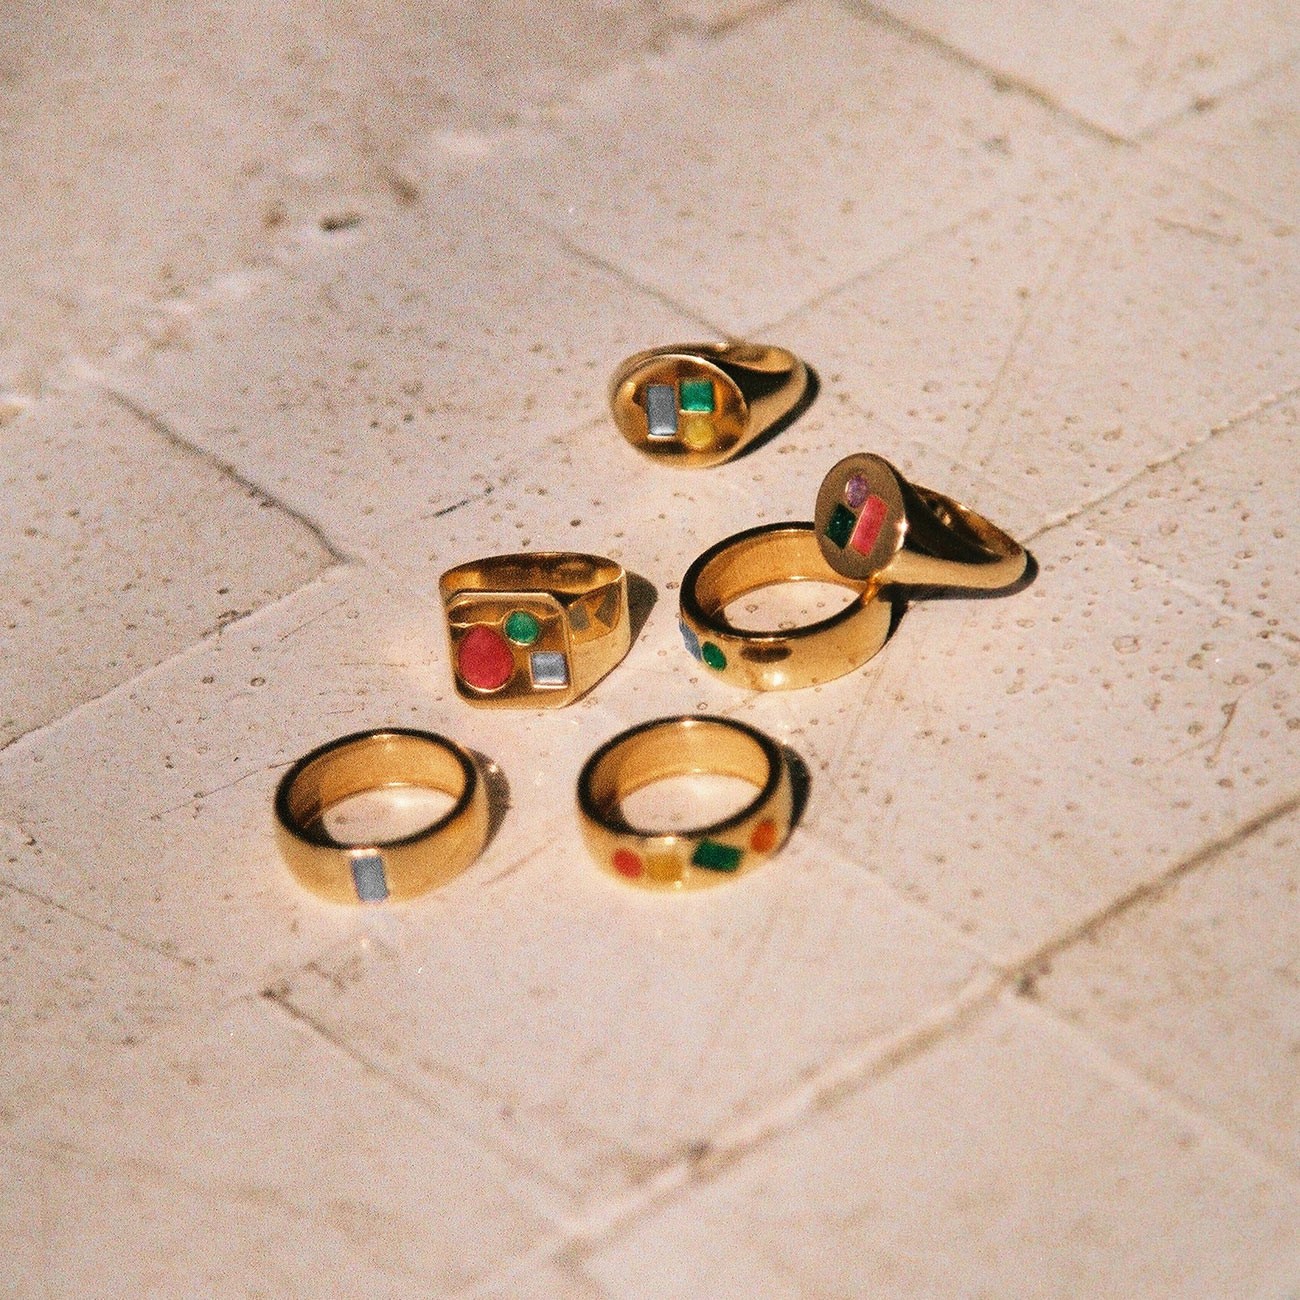 Wide ring with a colored stone